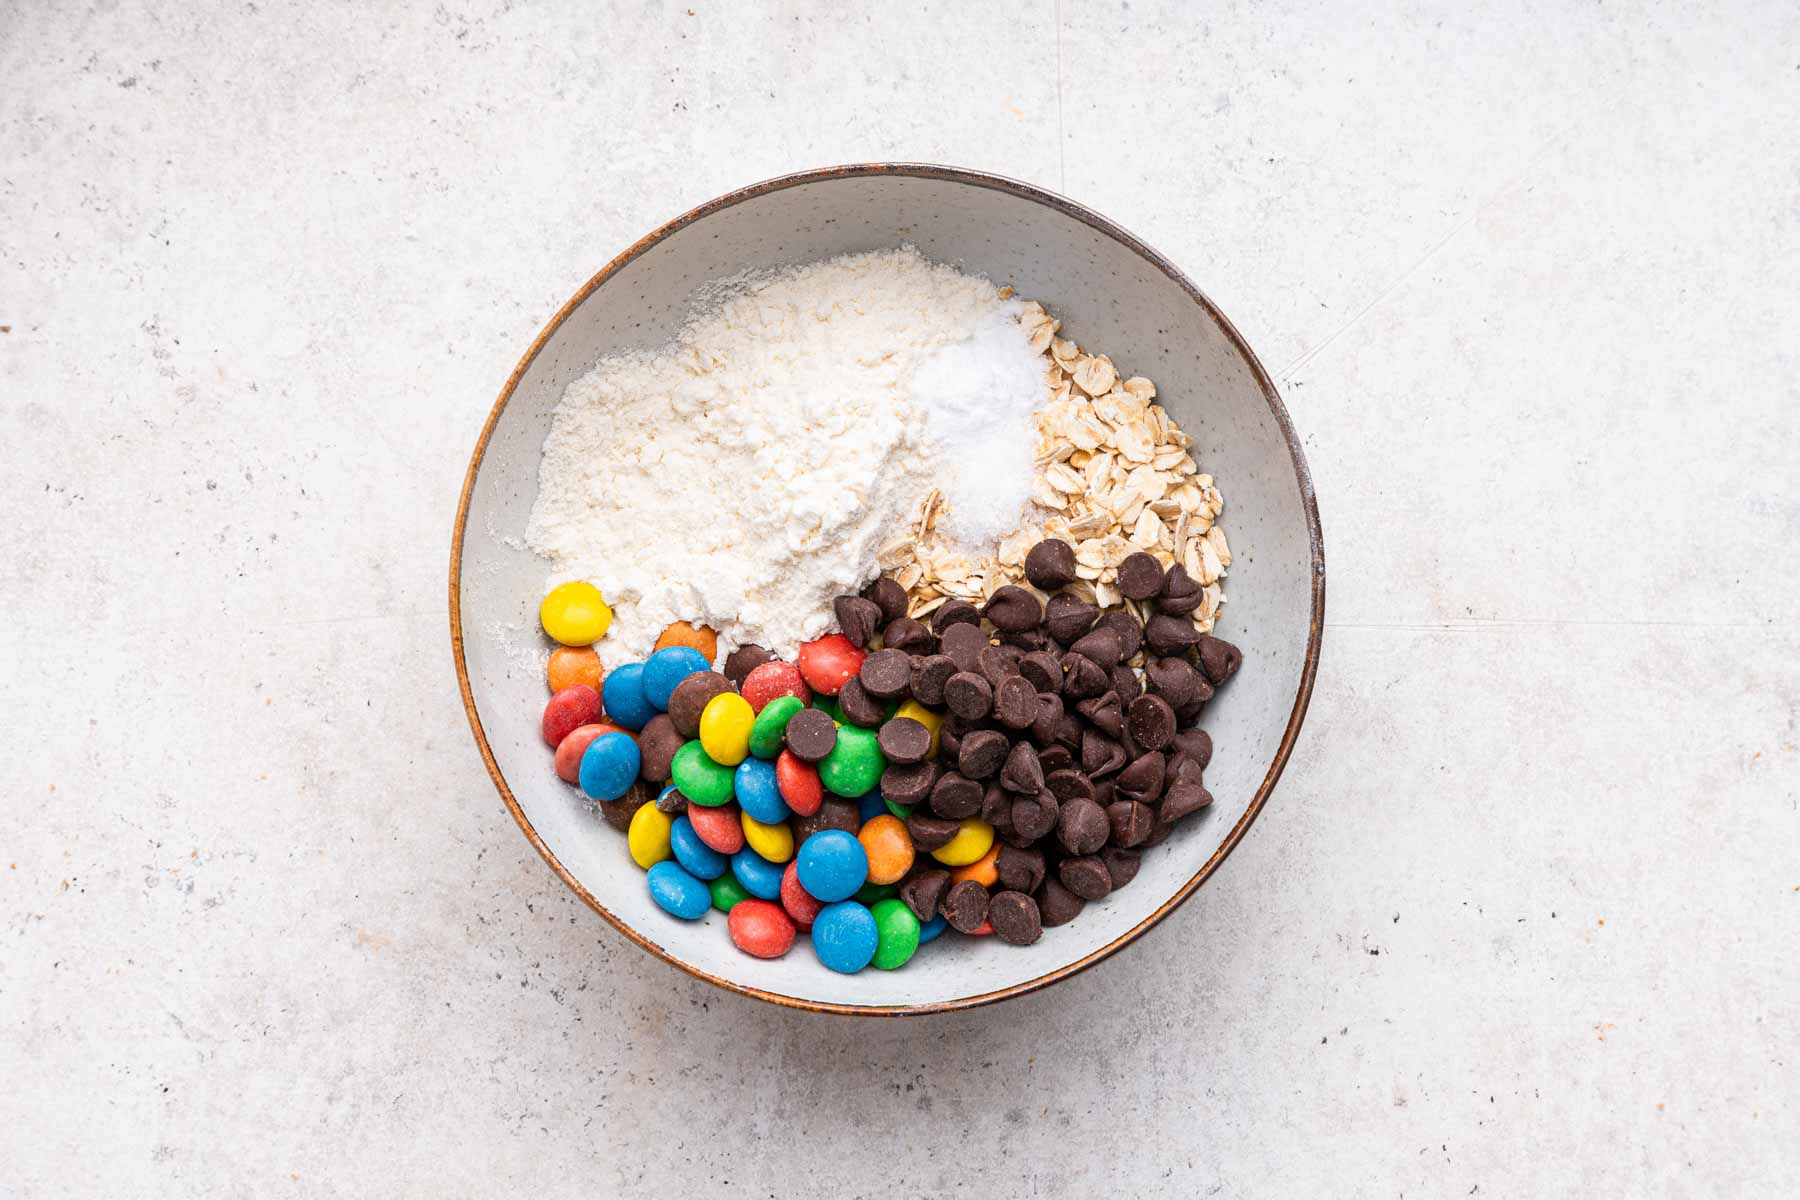 White bowl with flour, chocolate chips, oats and colorful chocolate candies.